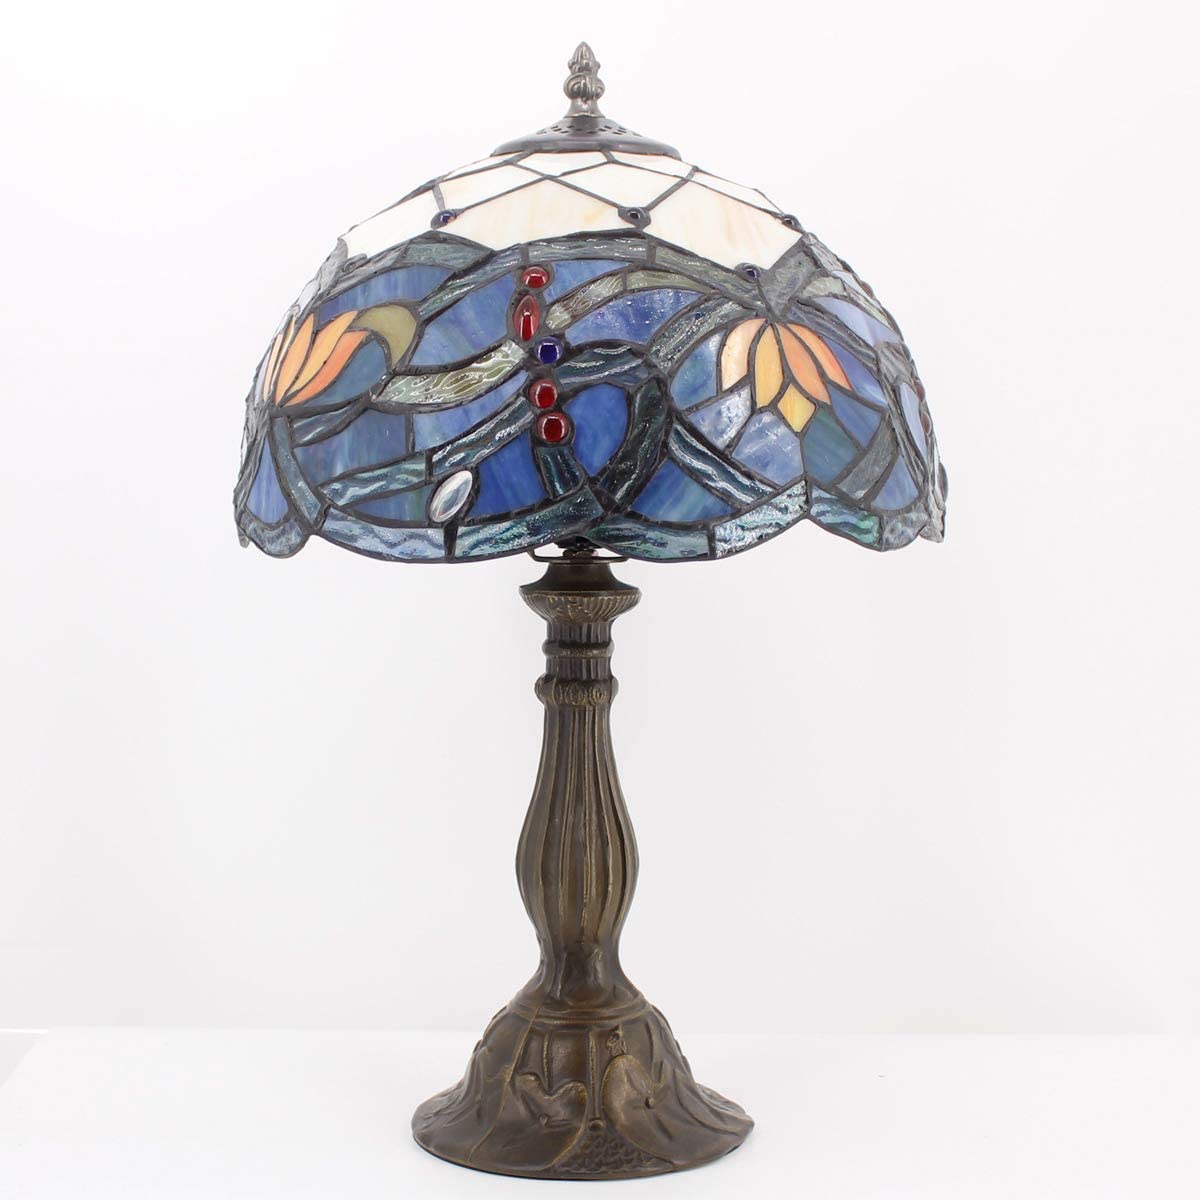 SHADY  Table Lamp Stained Glass Bedside Lamp Blue Lotus Desk Reading Light 12X12X18 Inches Decor Bedroom Living Room Home Office S220 Series